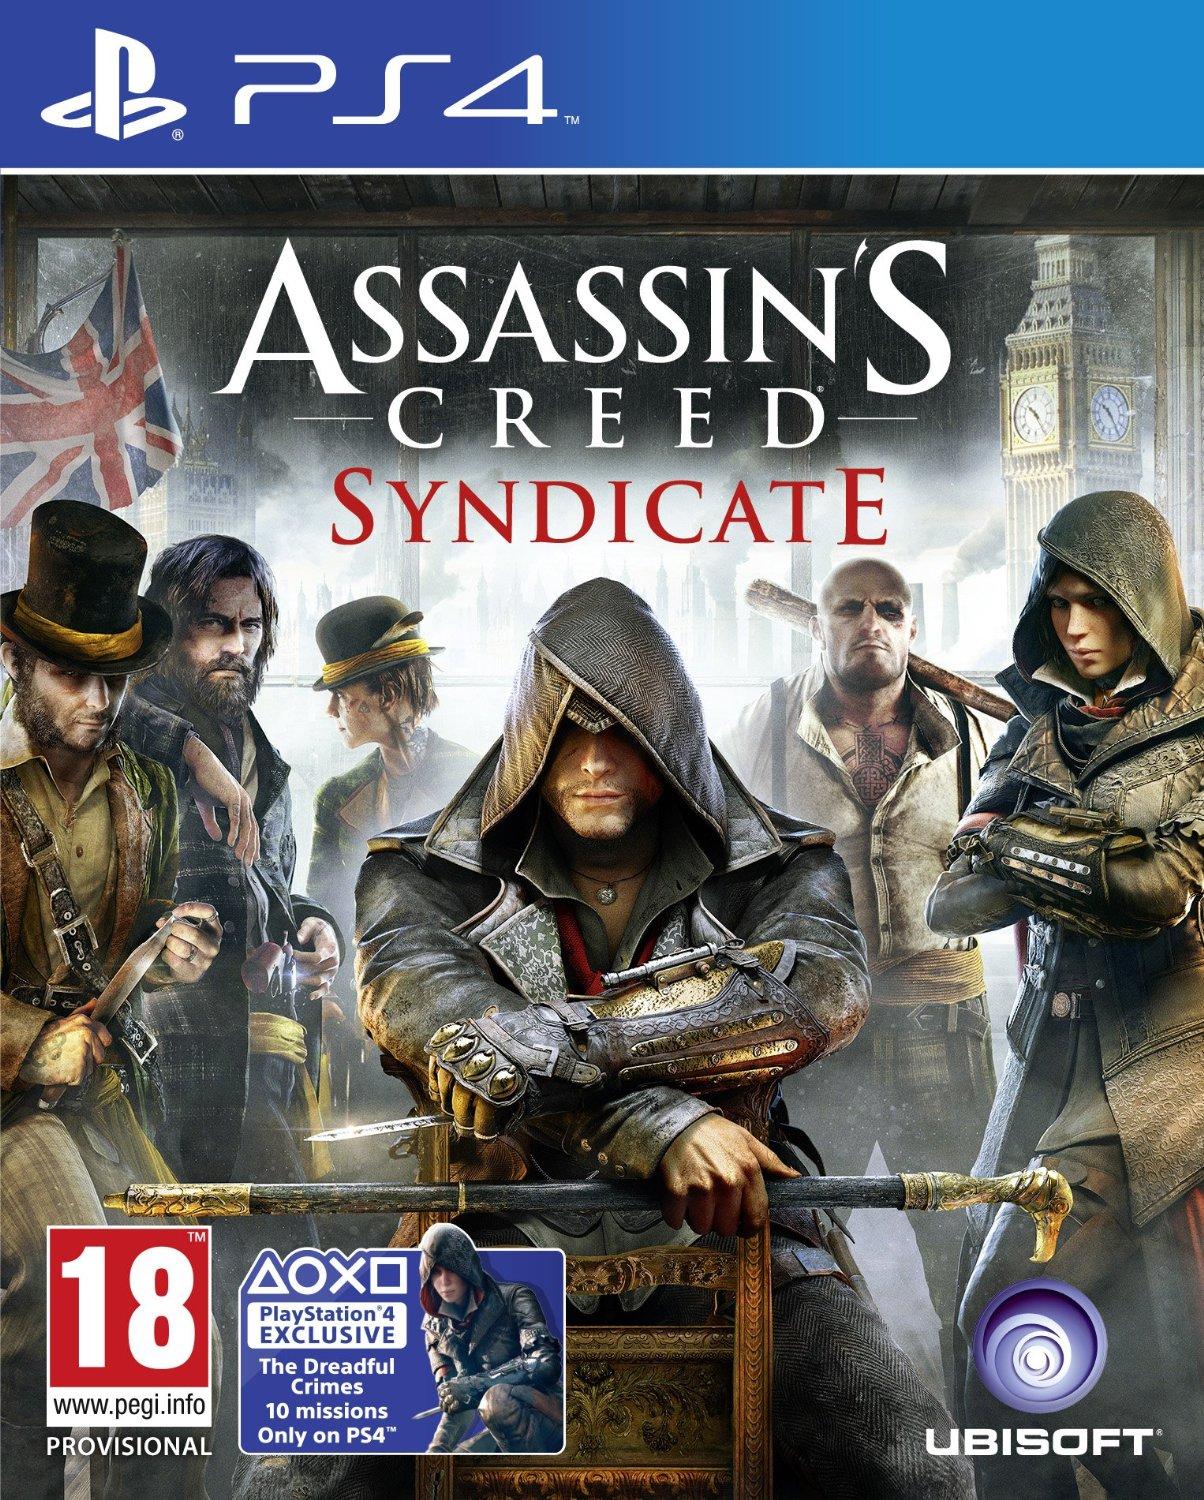 UBISOFT PS4 igrica Assassin's Creed Syndicate